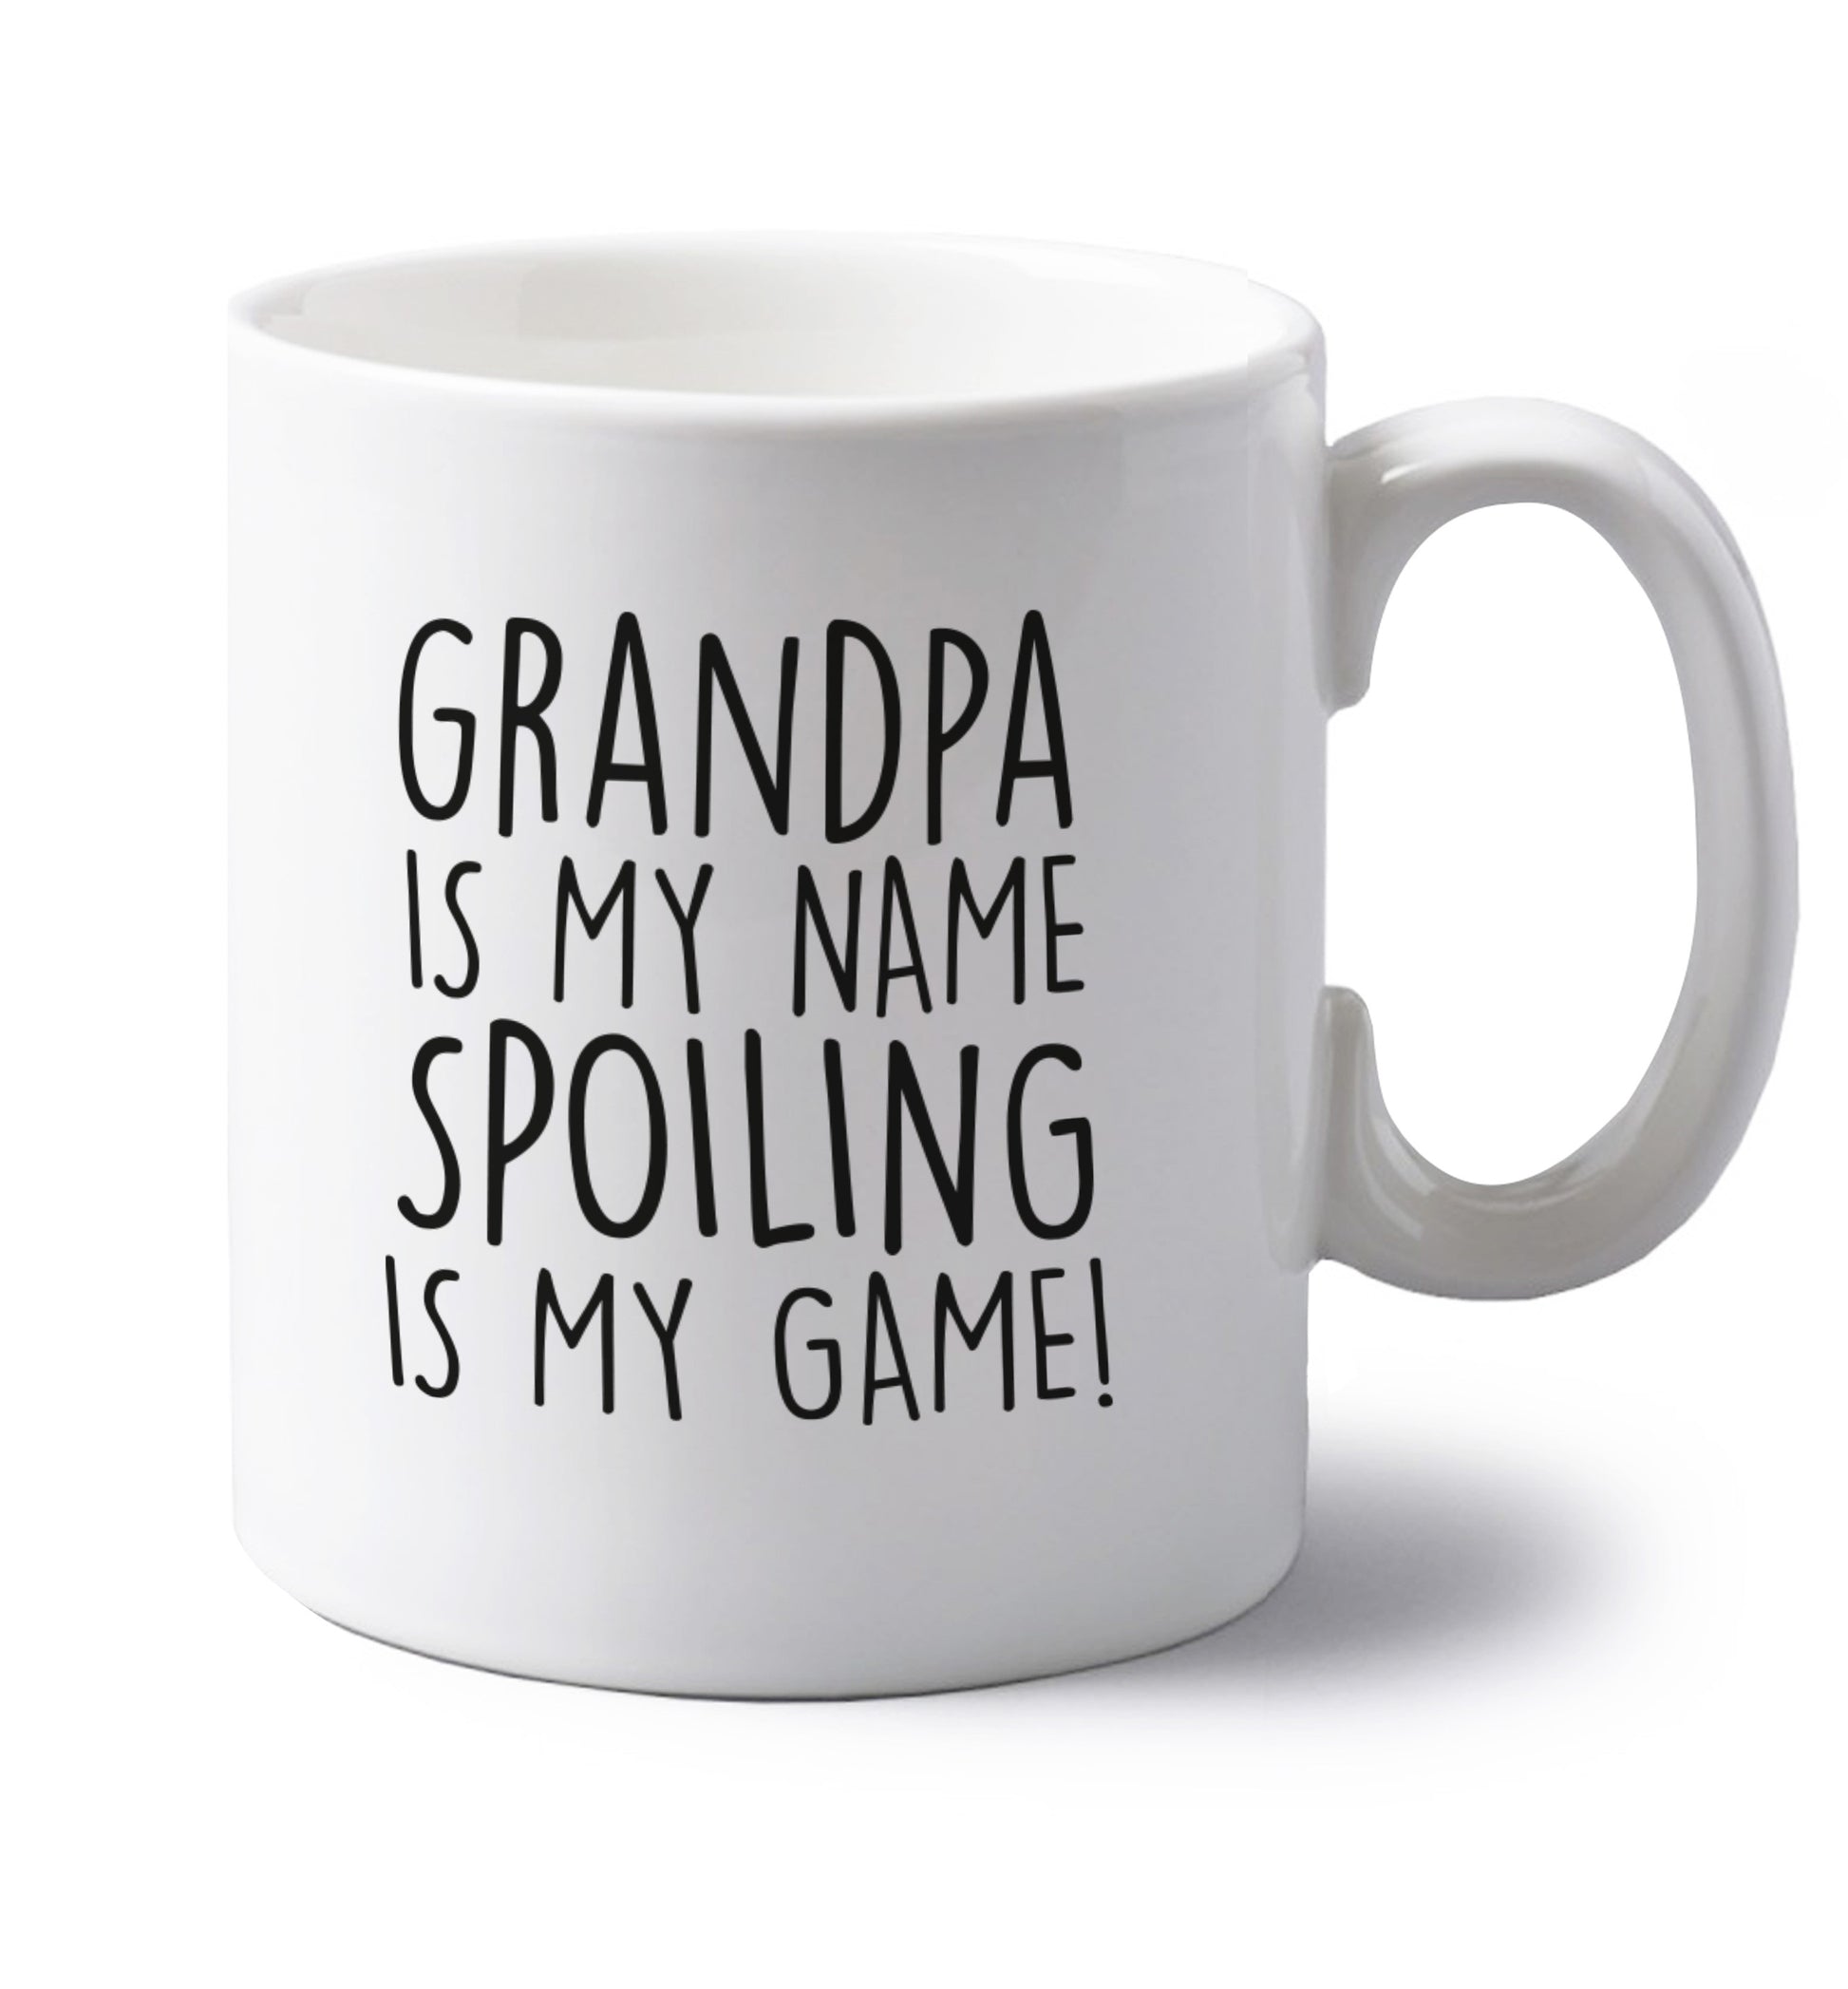 Grandpa is my name, spoiling is my game left handed white ceramic mug 